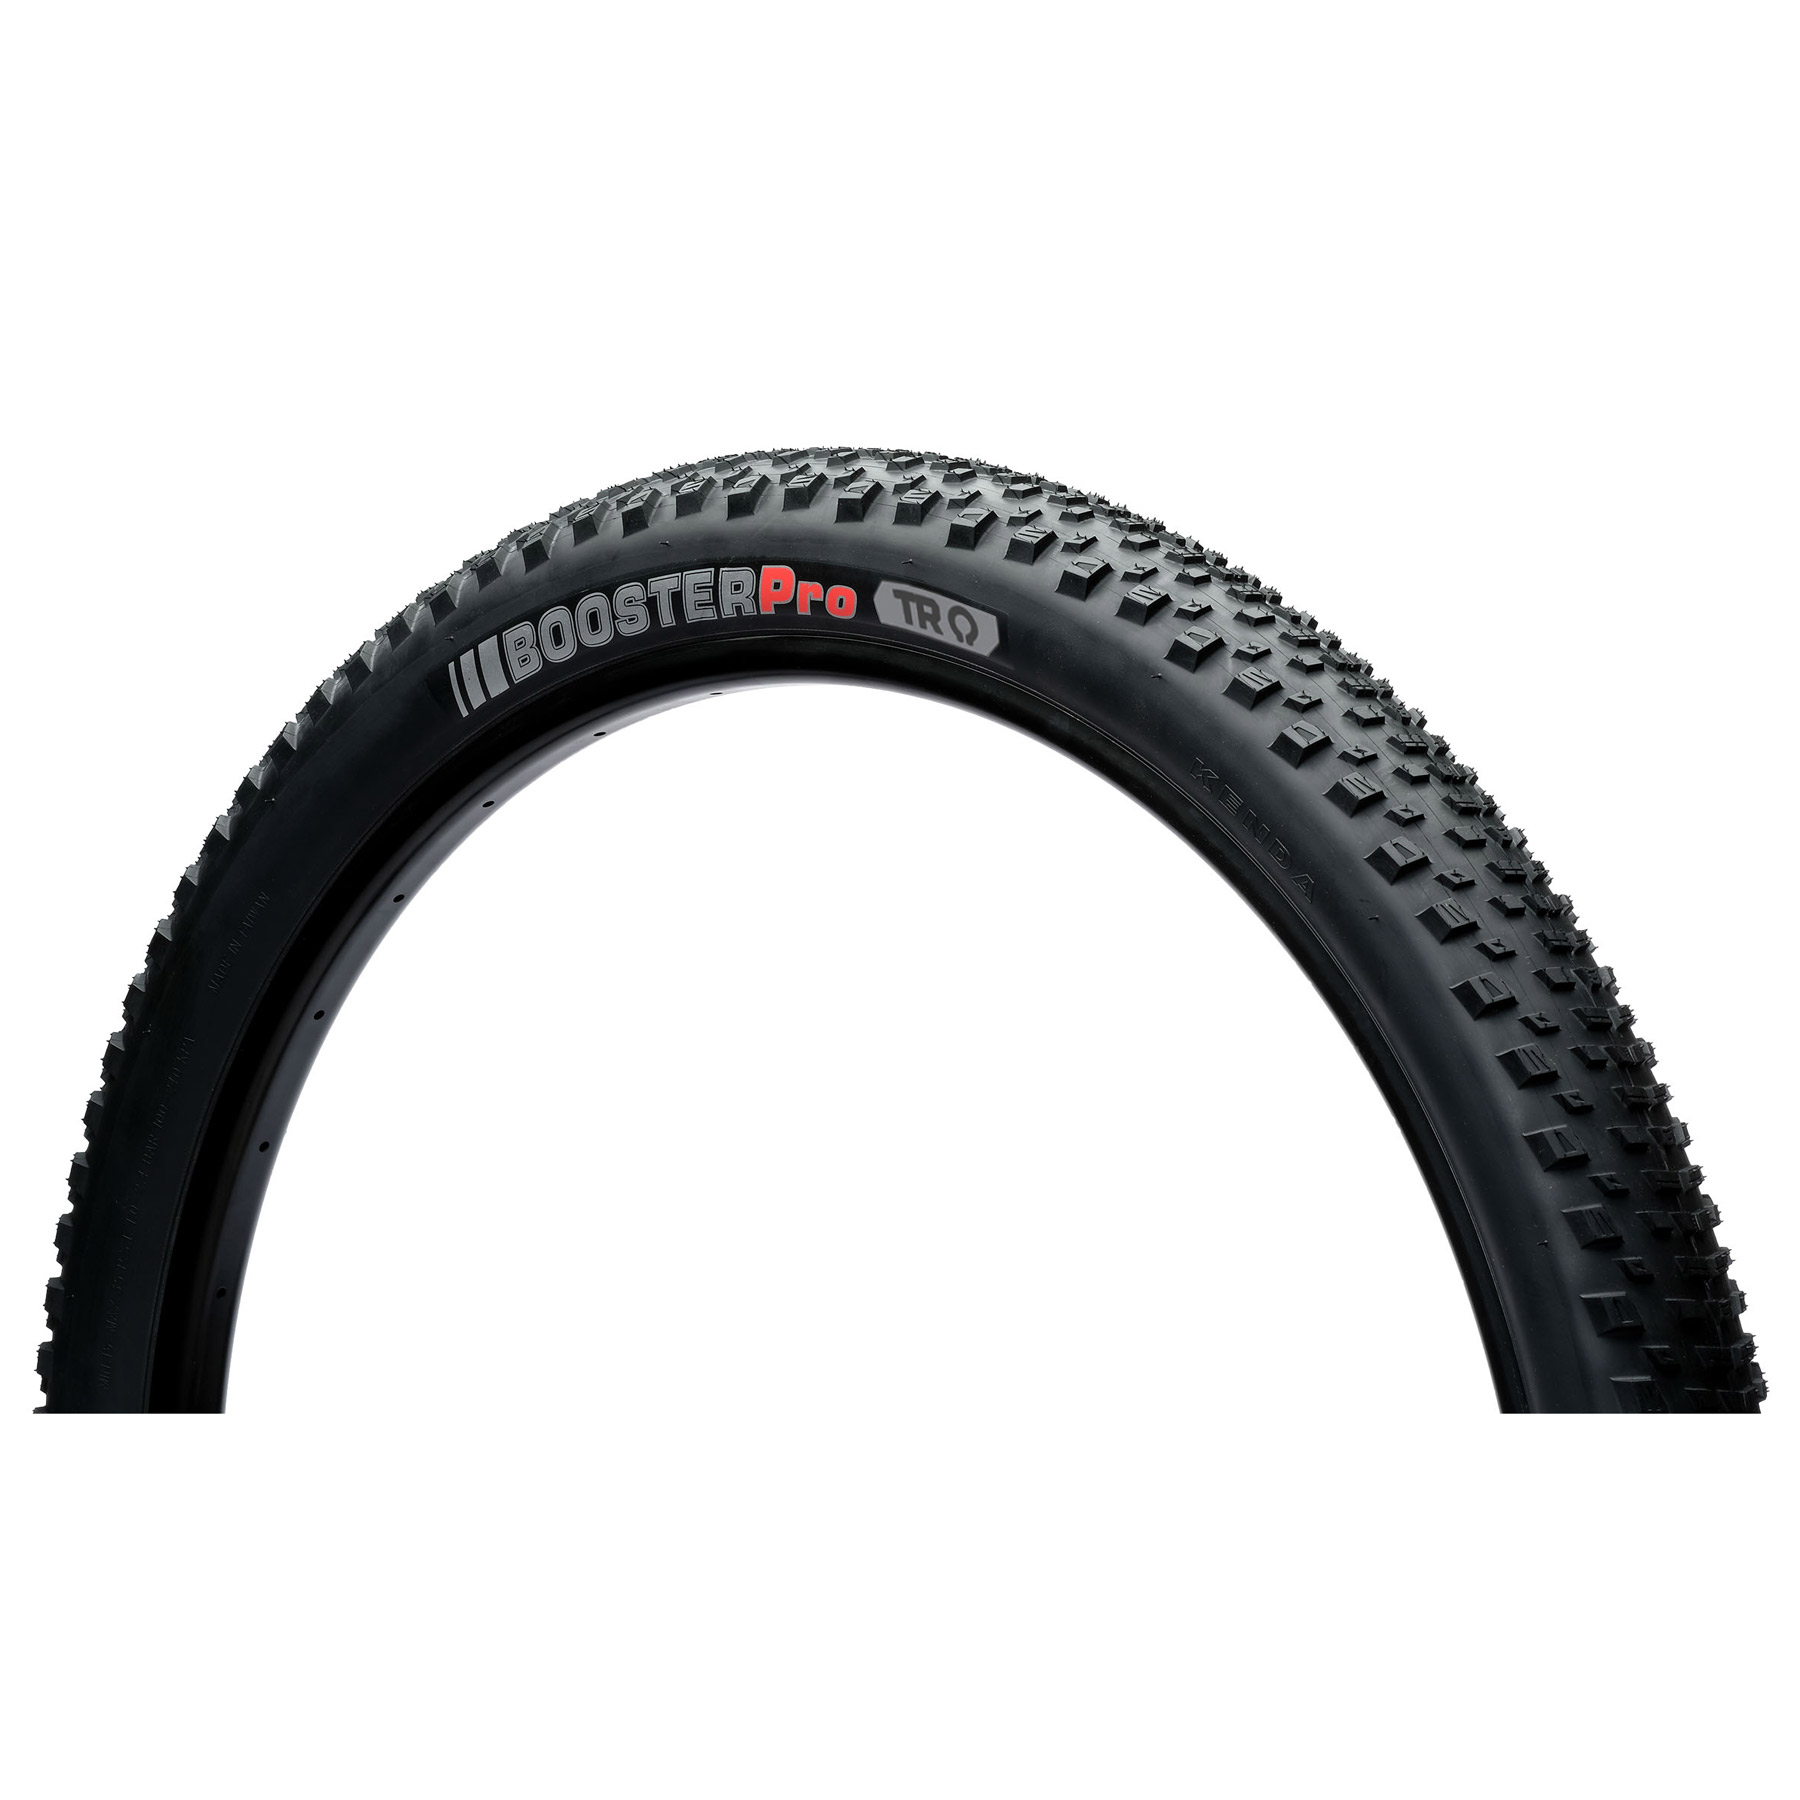 Picture of Kenda Booster Pro GCT Folding Tire - 40-622